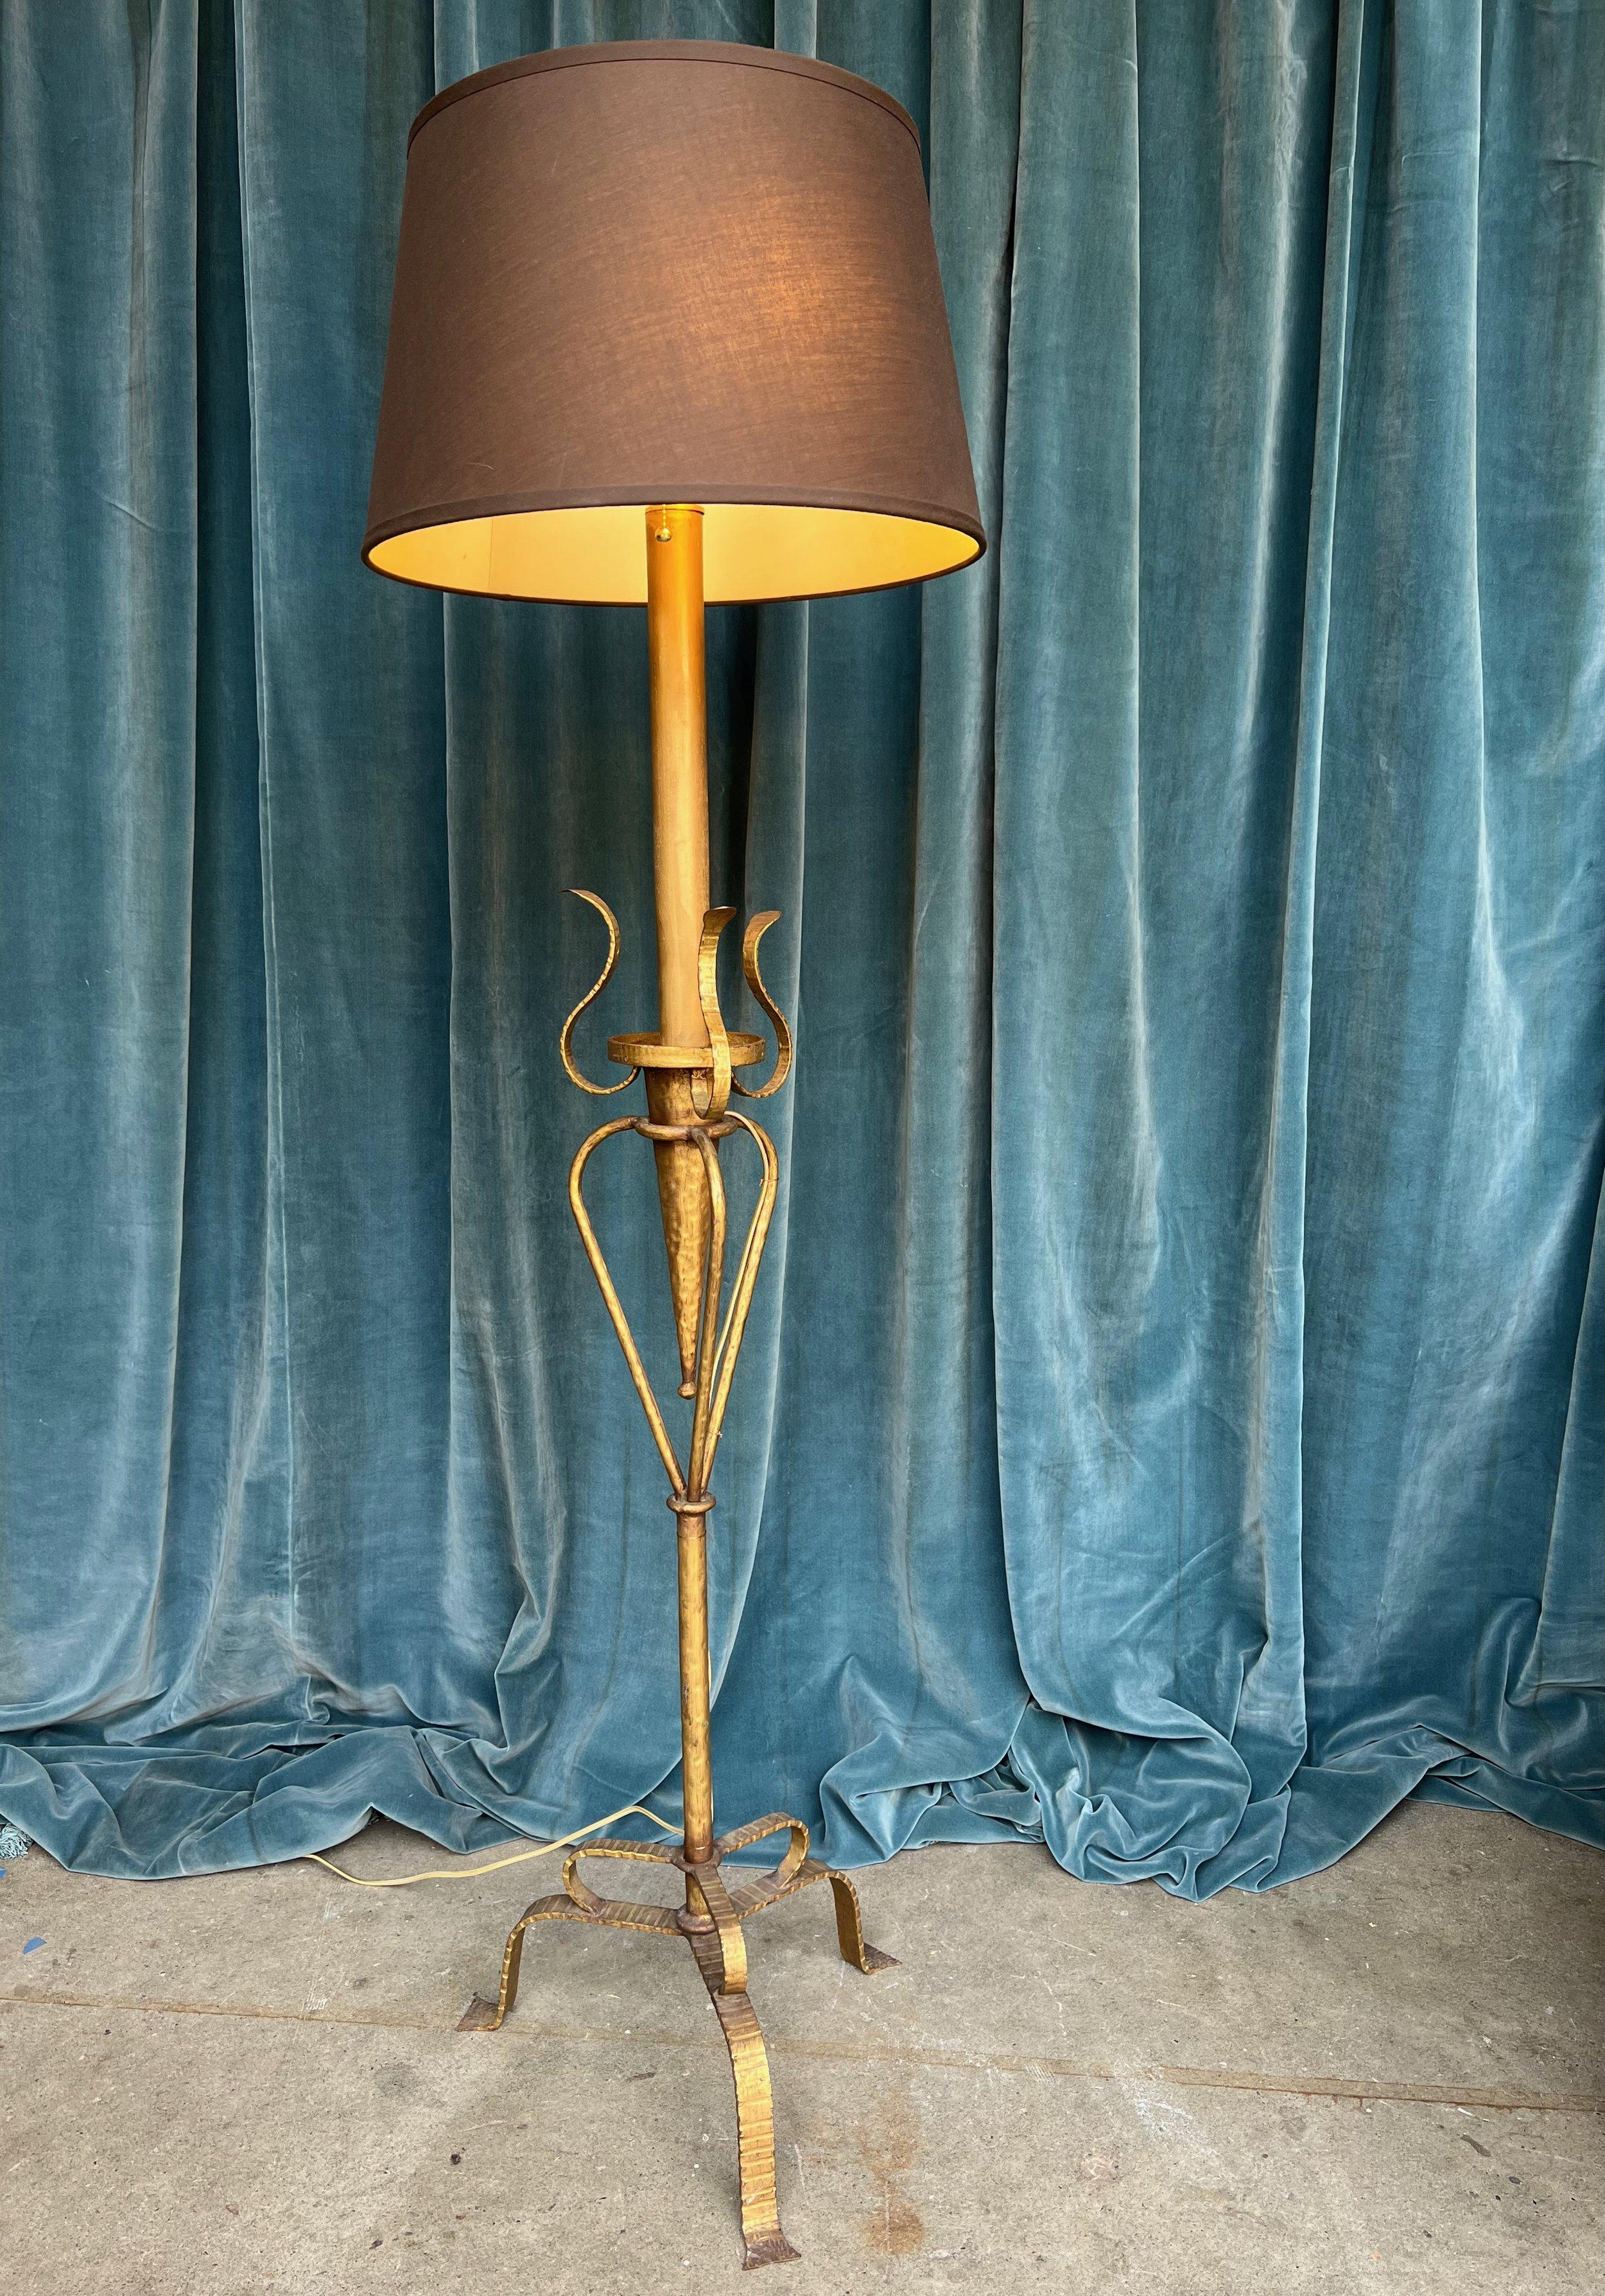 Introducing a unique Spanish gilt metal floor lamp from the 1950s. This captivating piece seamlessly blends Art Nouveau and mid-century modern styles. Its organic carved metal decorations and fluid design make it truly one-of-a-kind. Supported by a